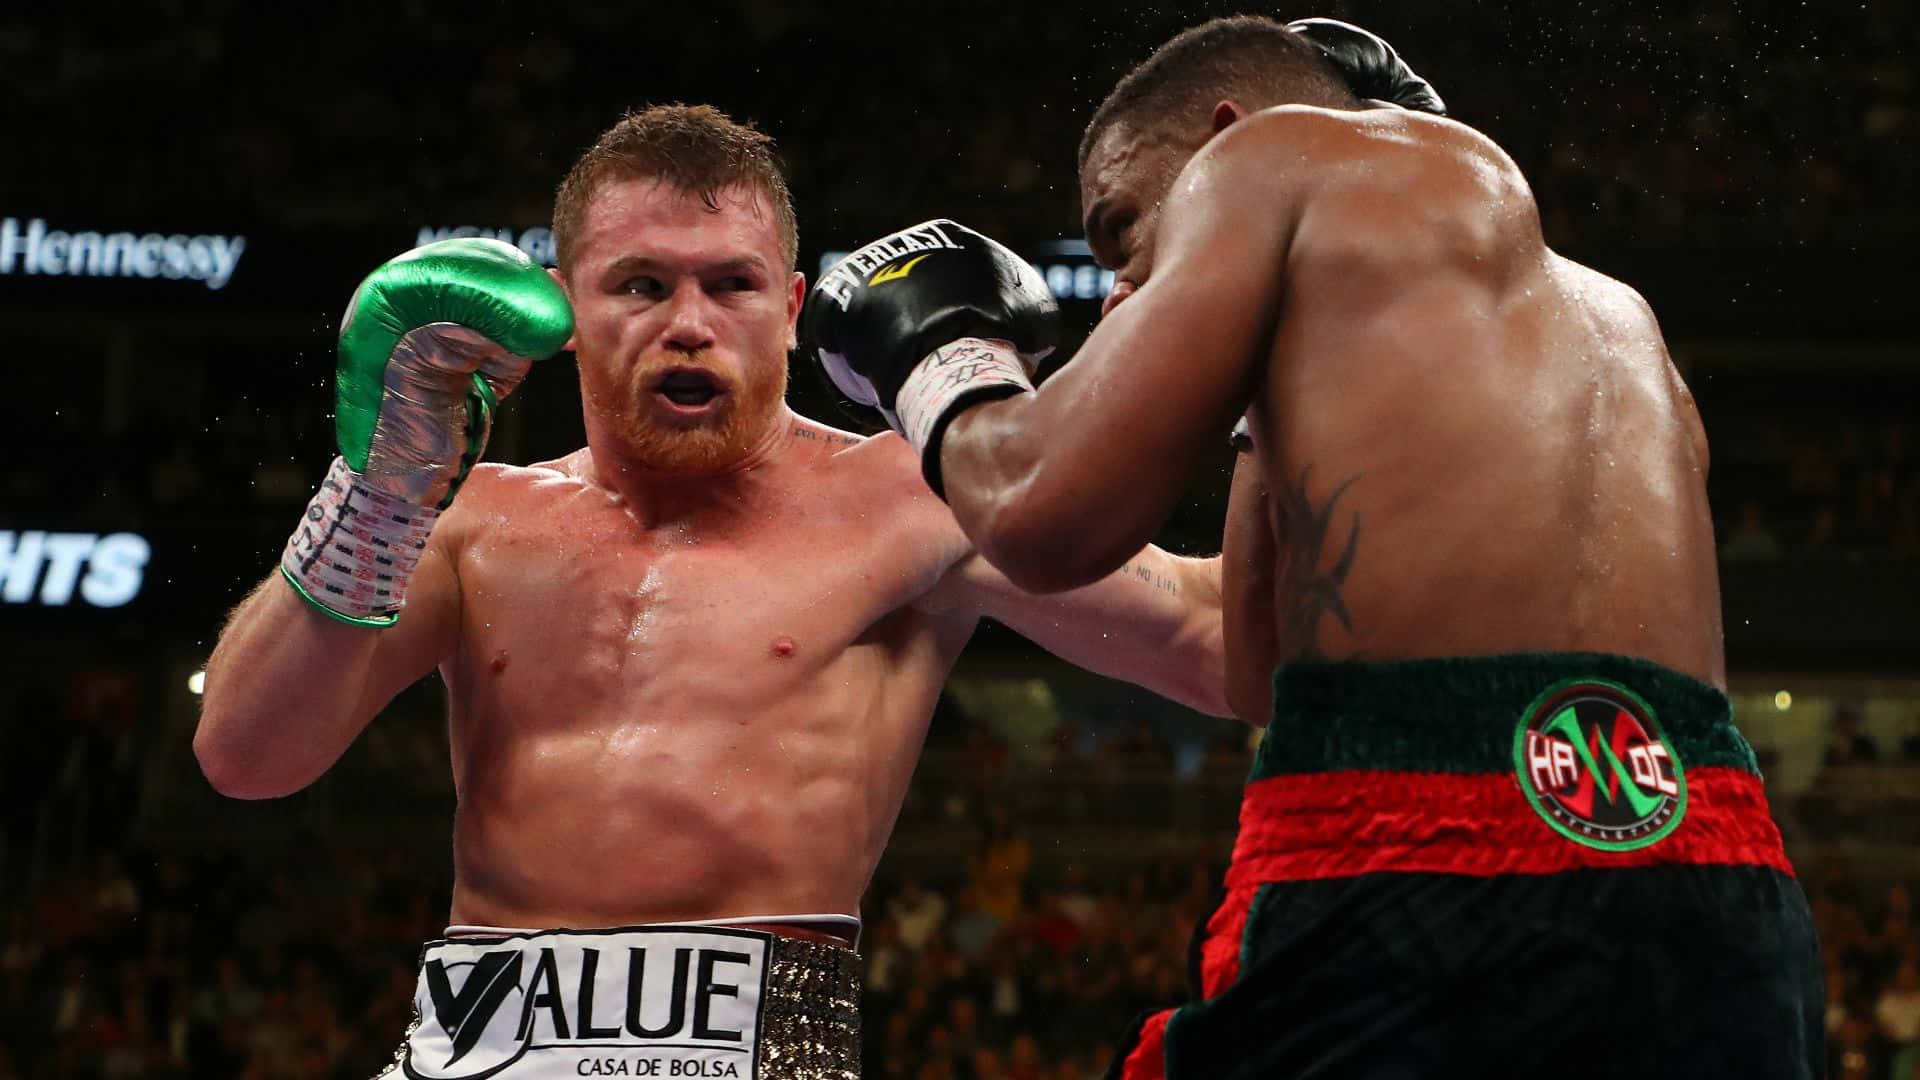 The Power-packed Punch: Saul Canelo Alvarez In Action Wallpaper